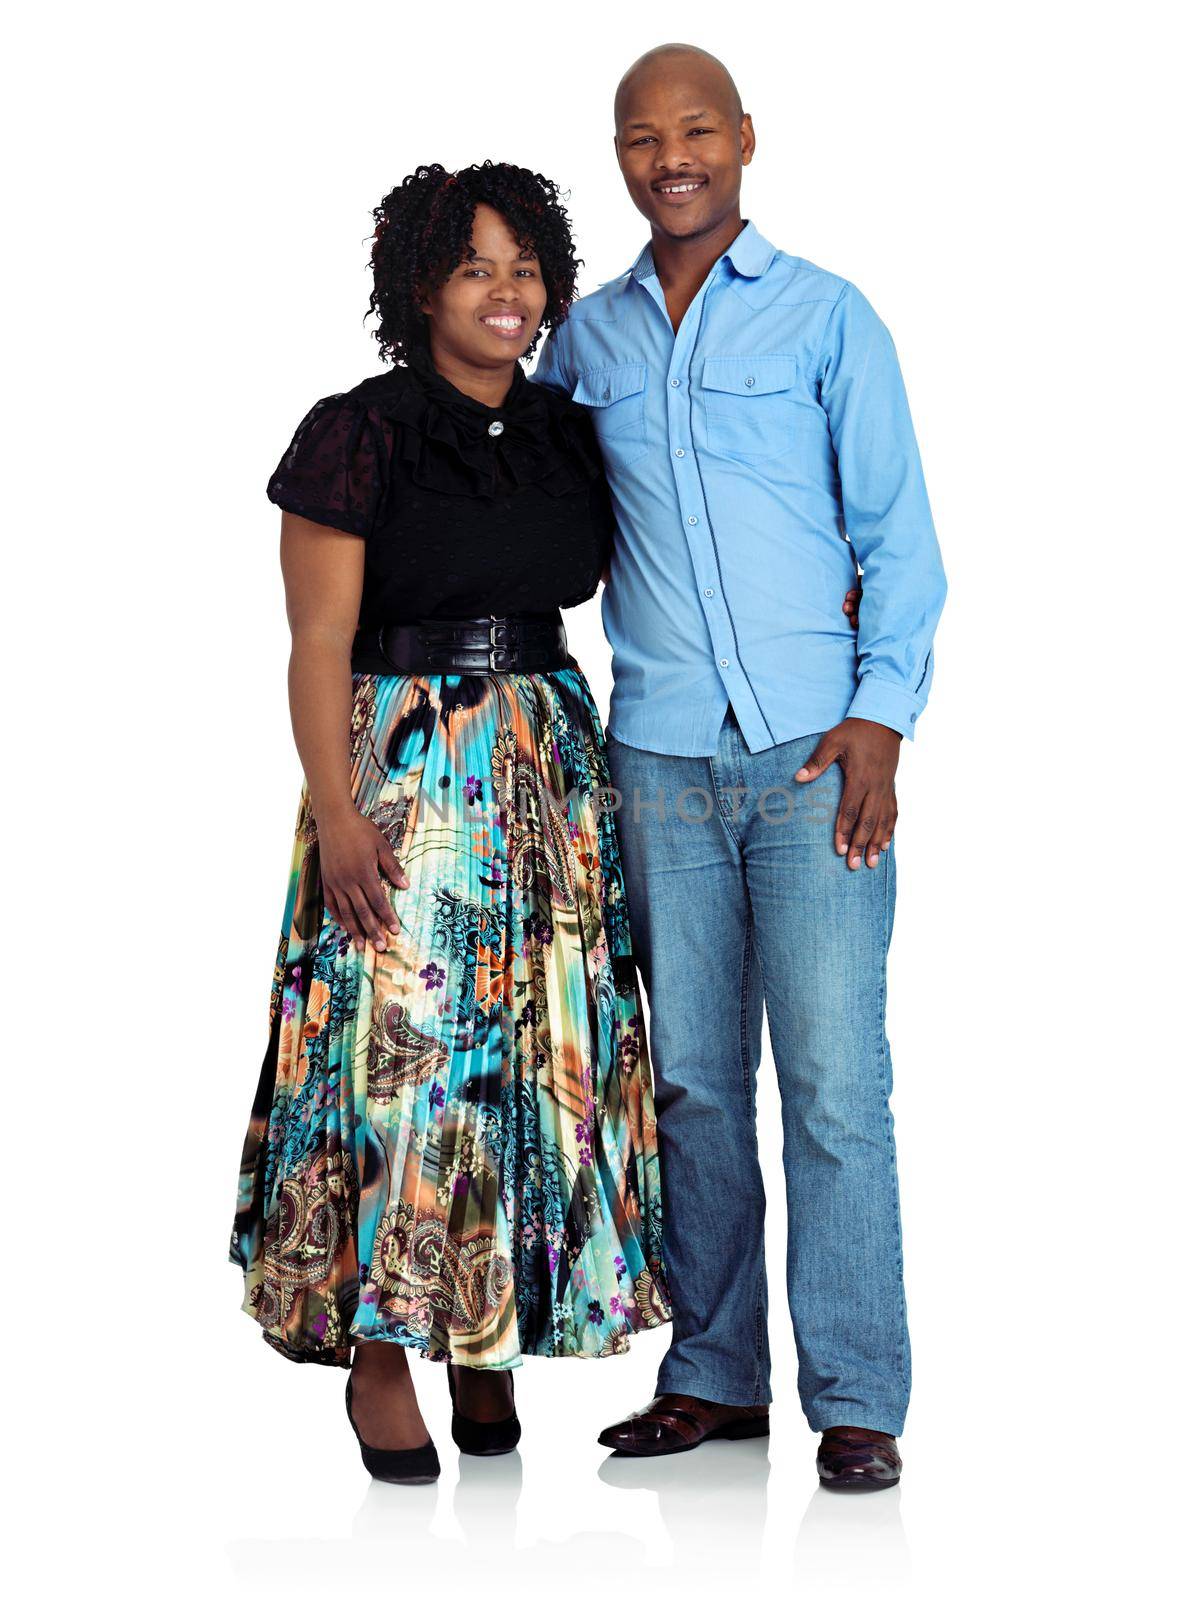 Studio shot of a happy black couple standing against a white background.